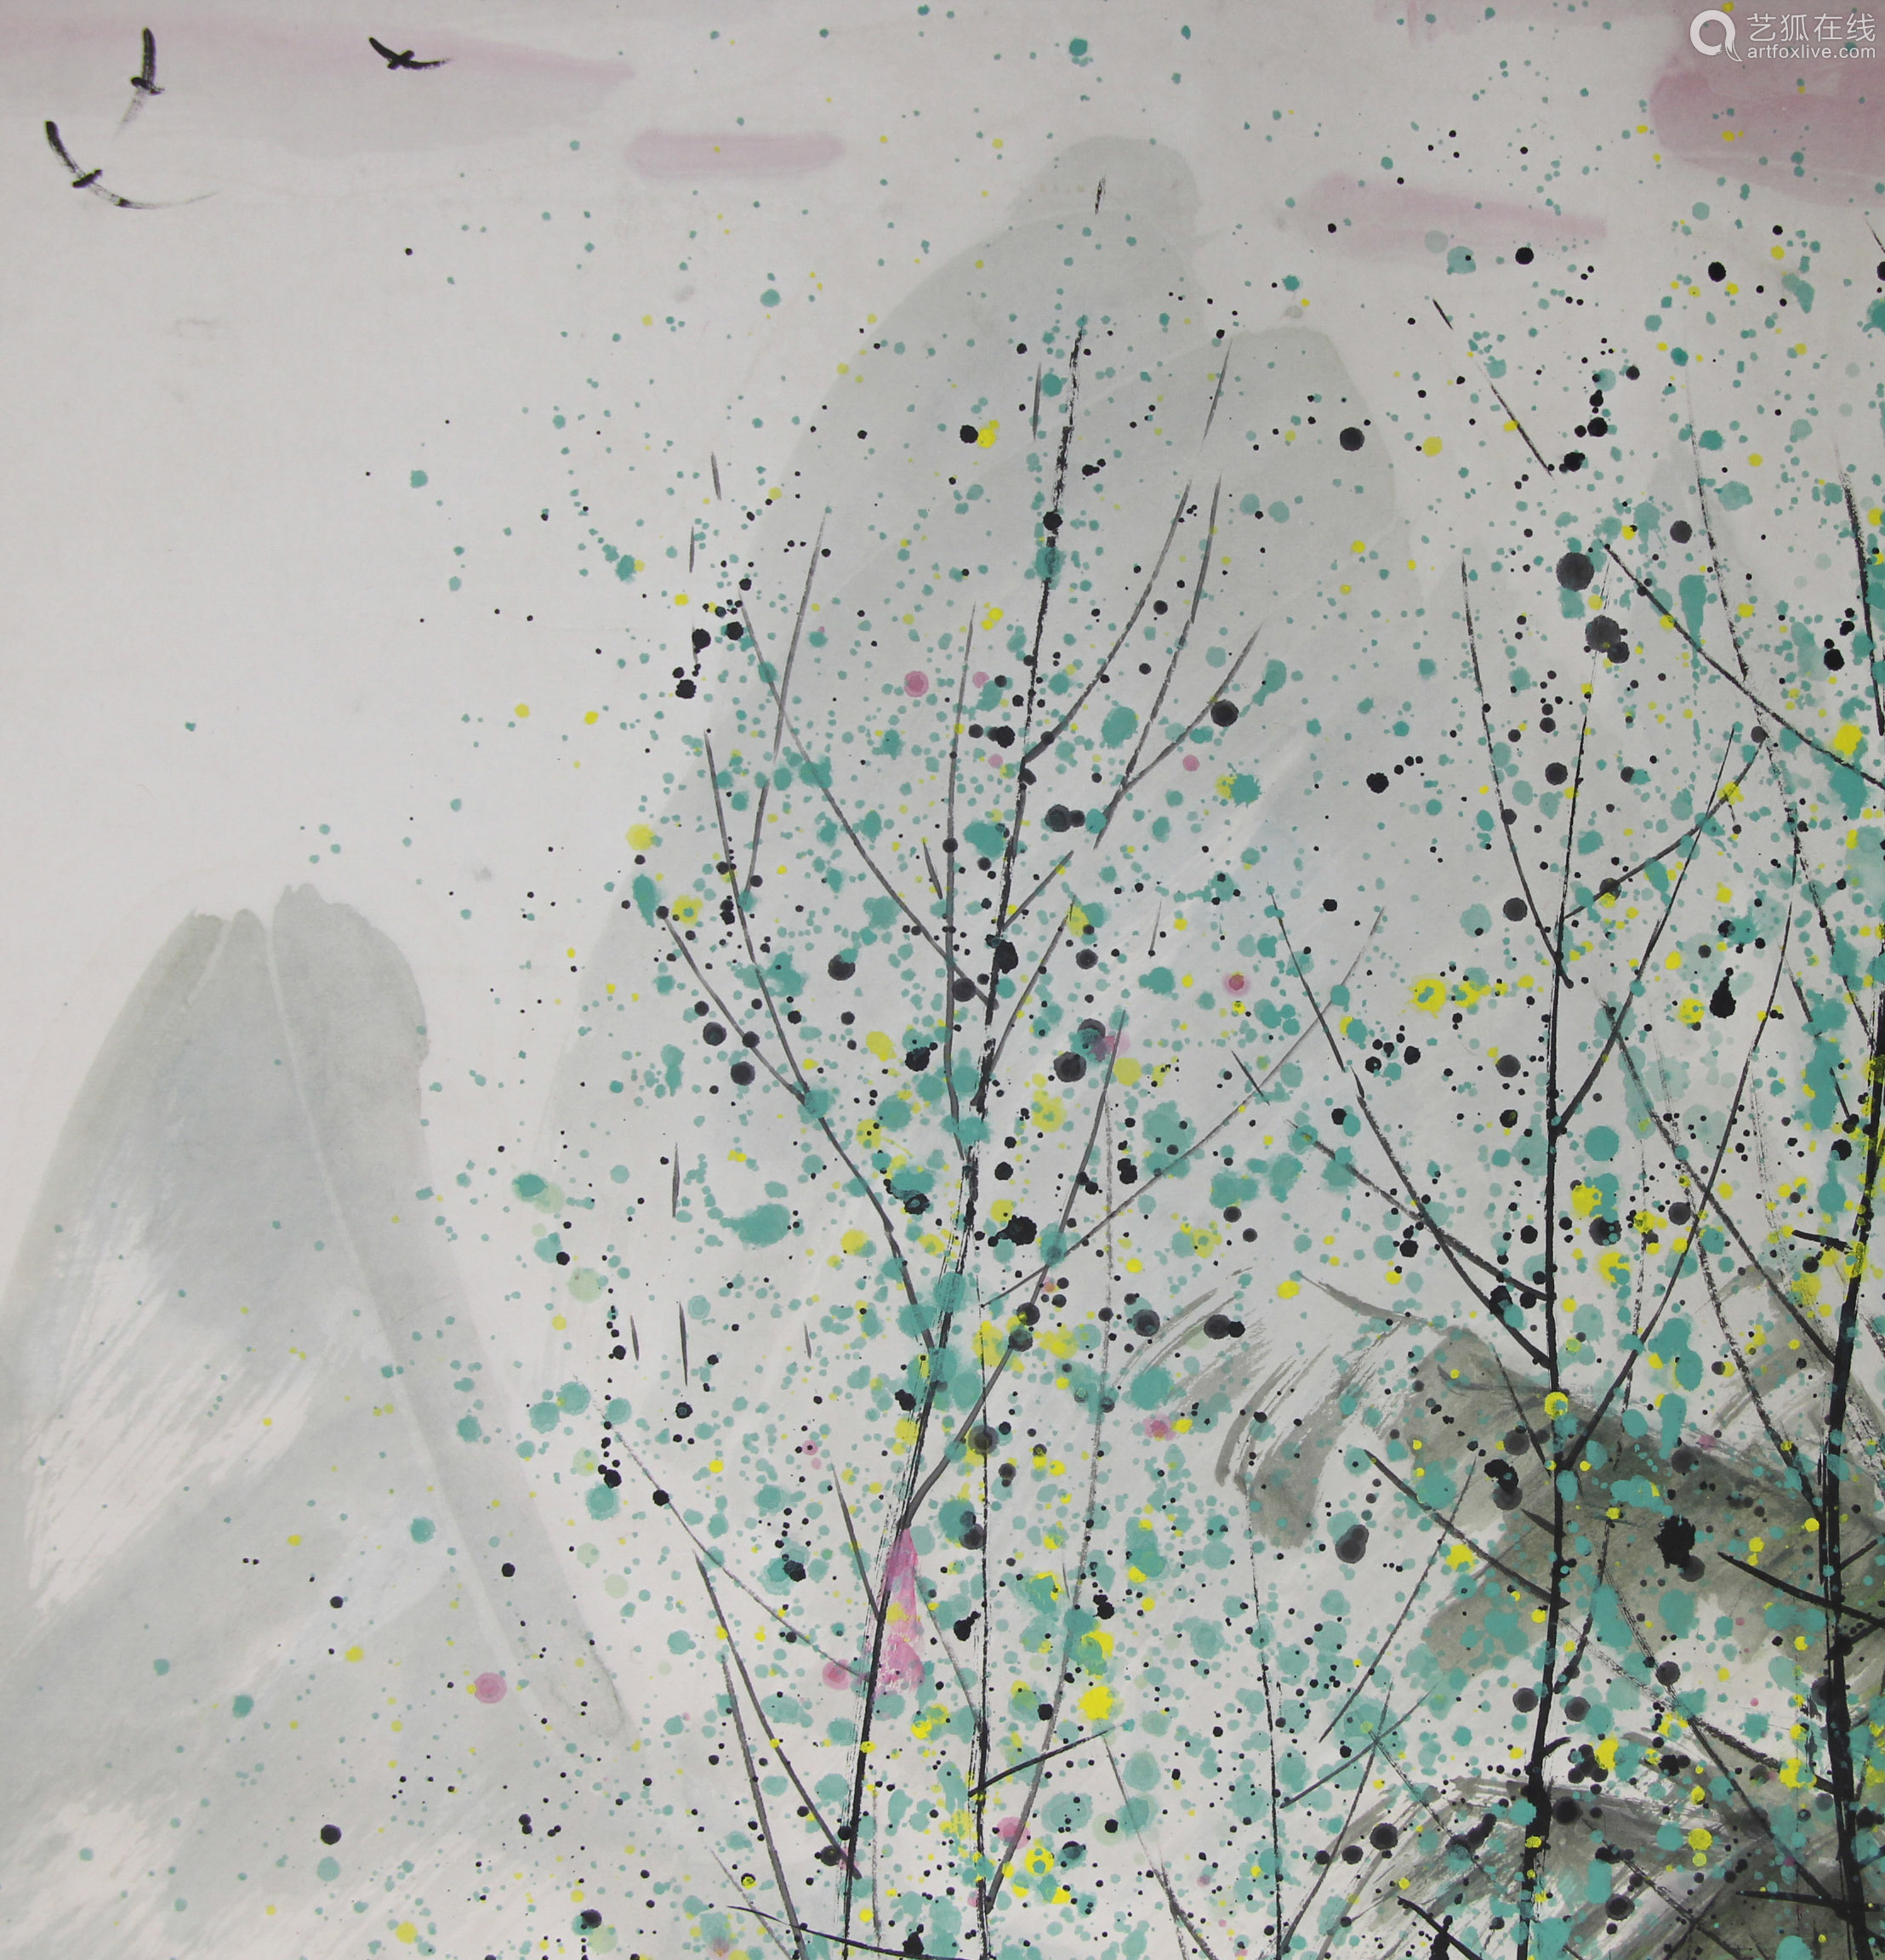 Chinese ink painting,
Wu Guanzhong's Ink and Wash Landscape ...